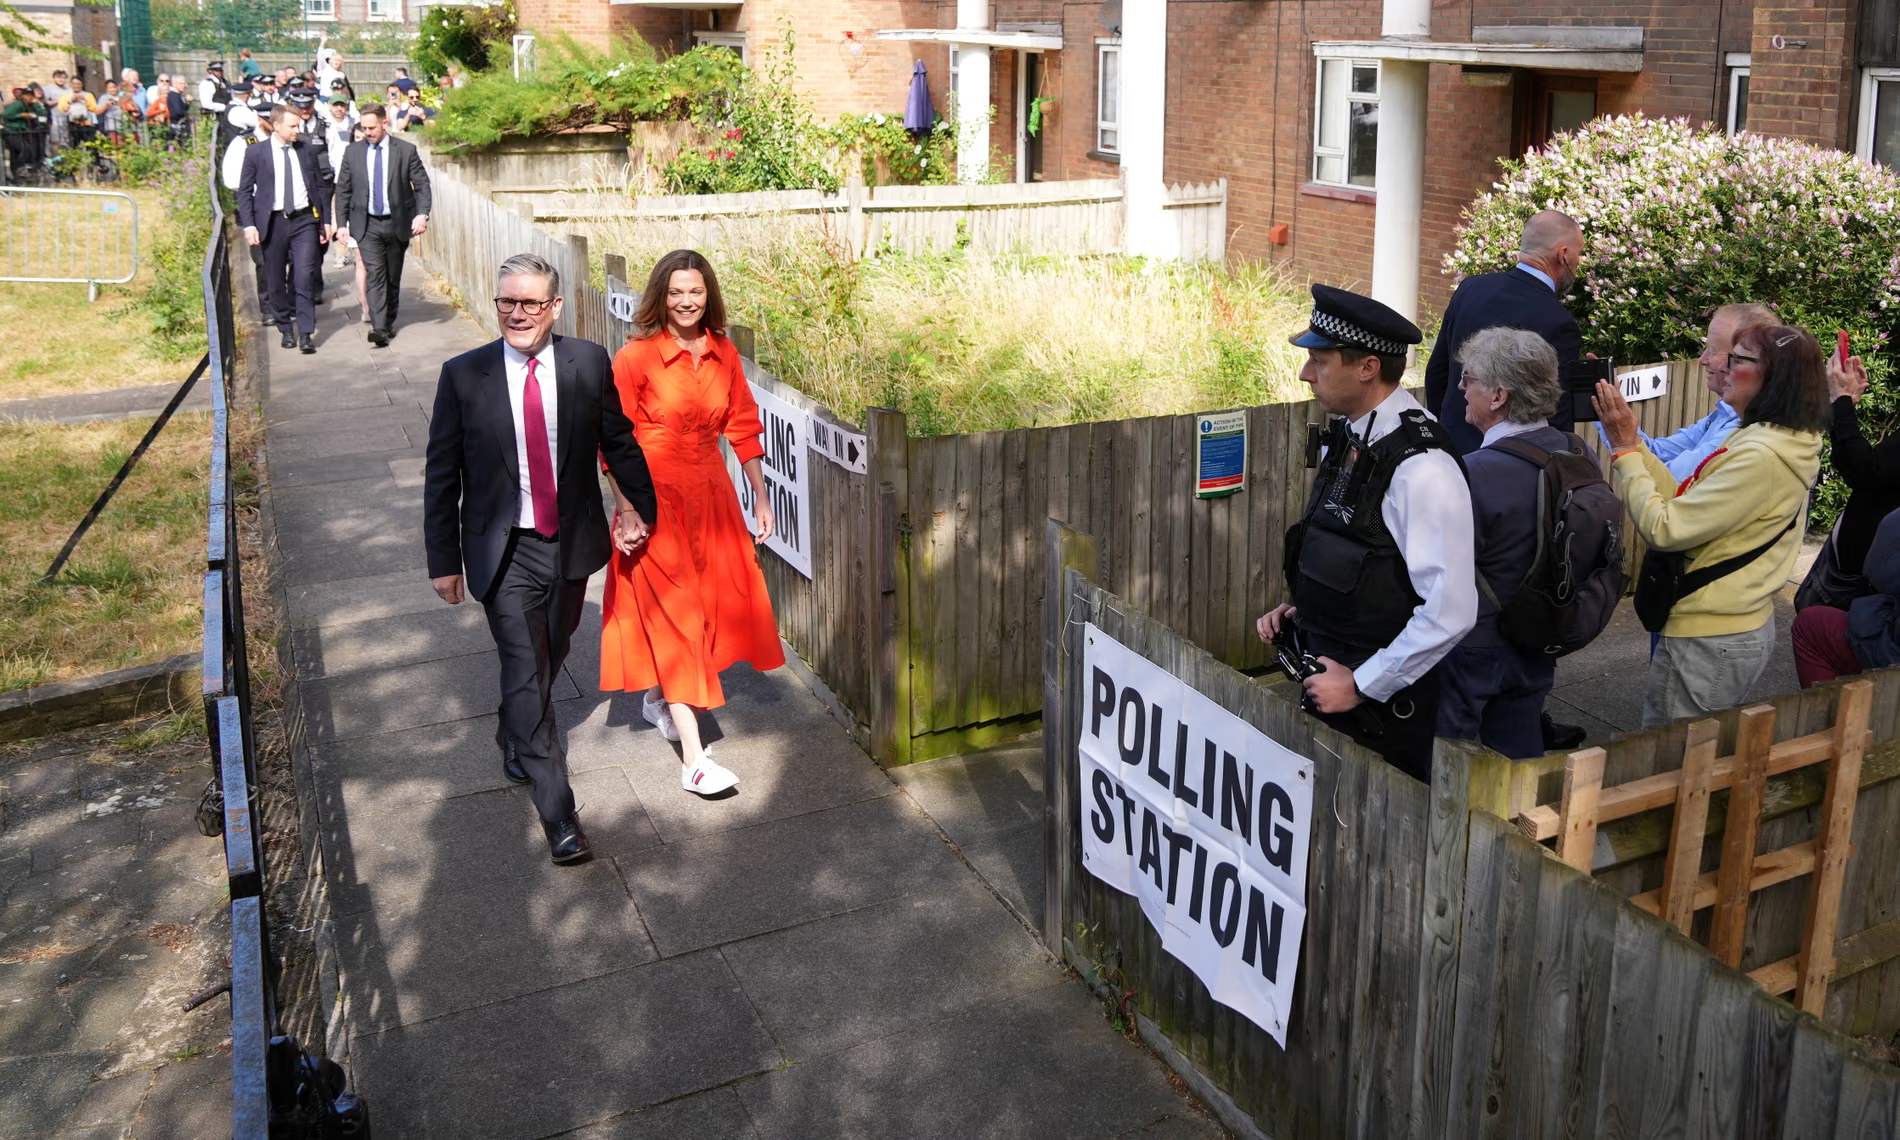 Party leaders join millions across the UK casting their votes